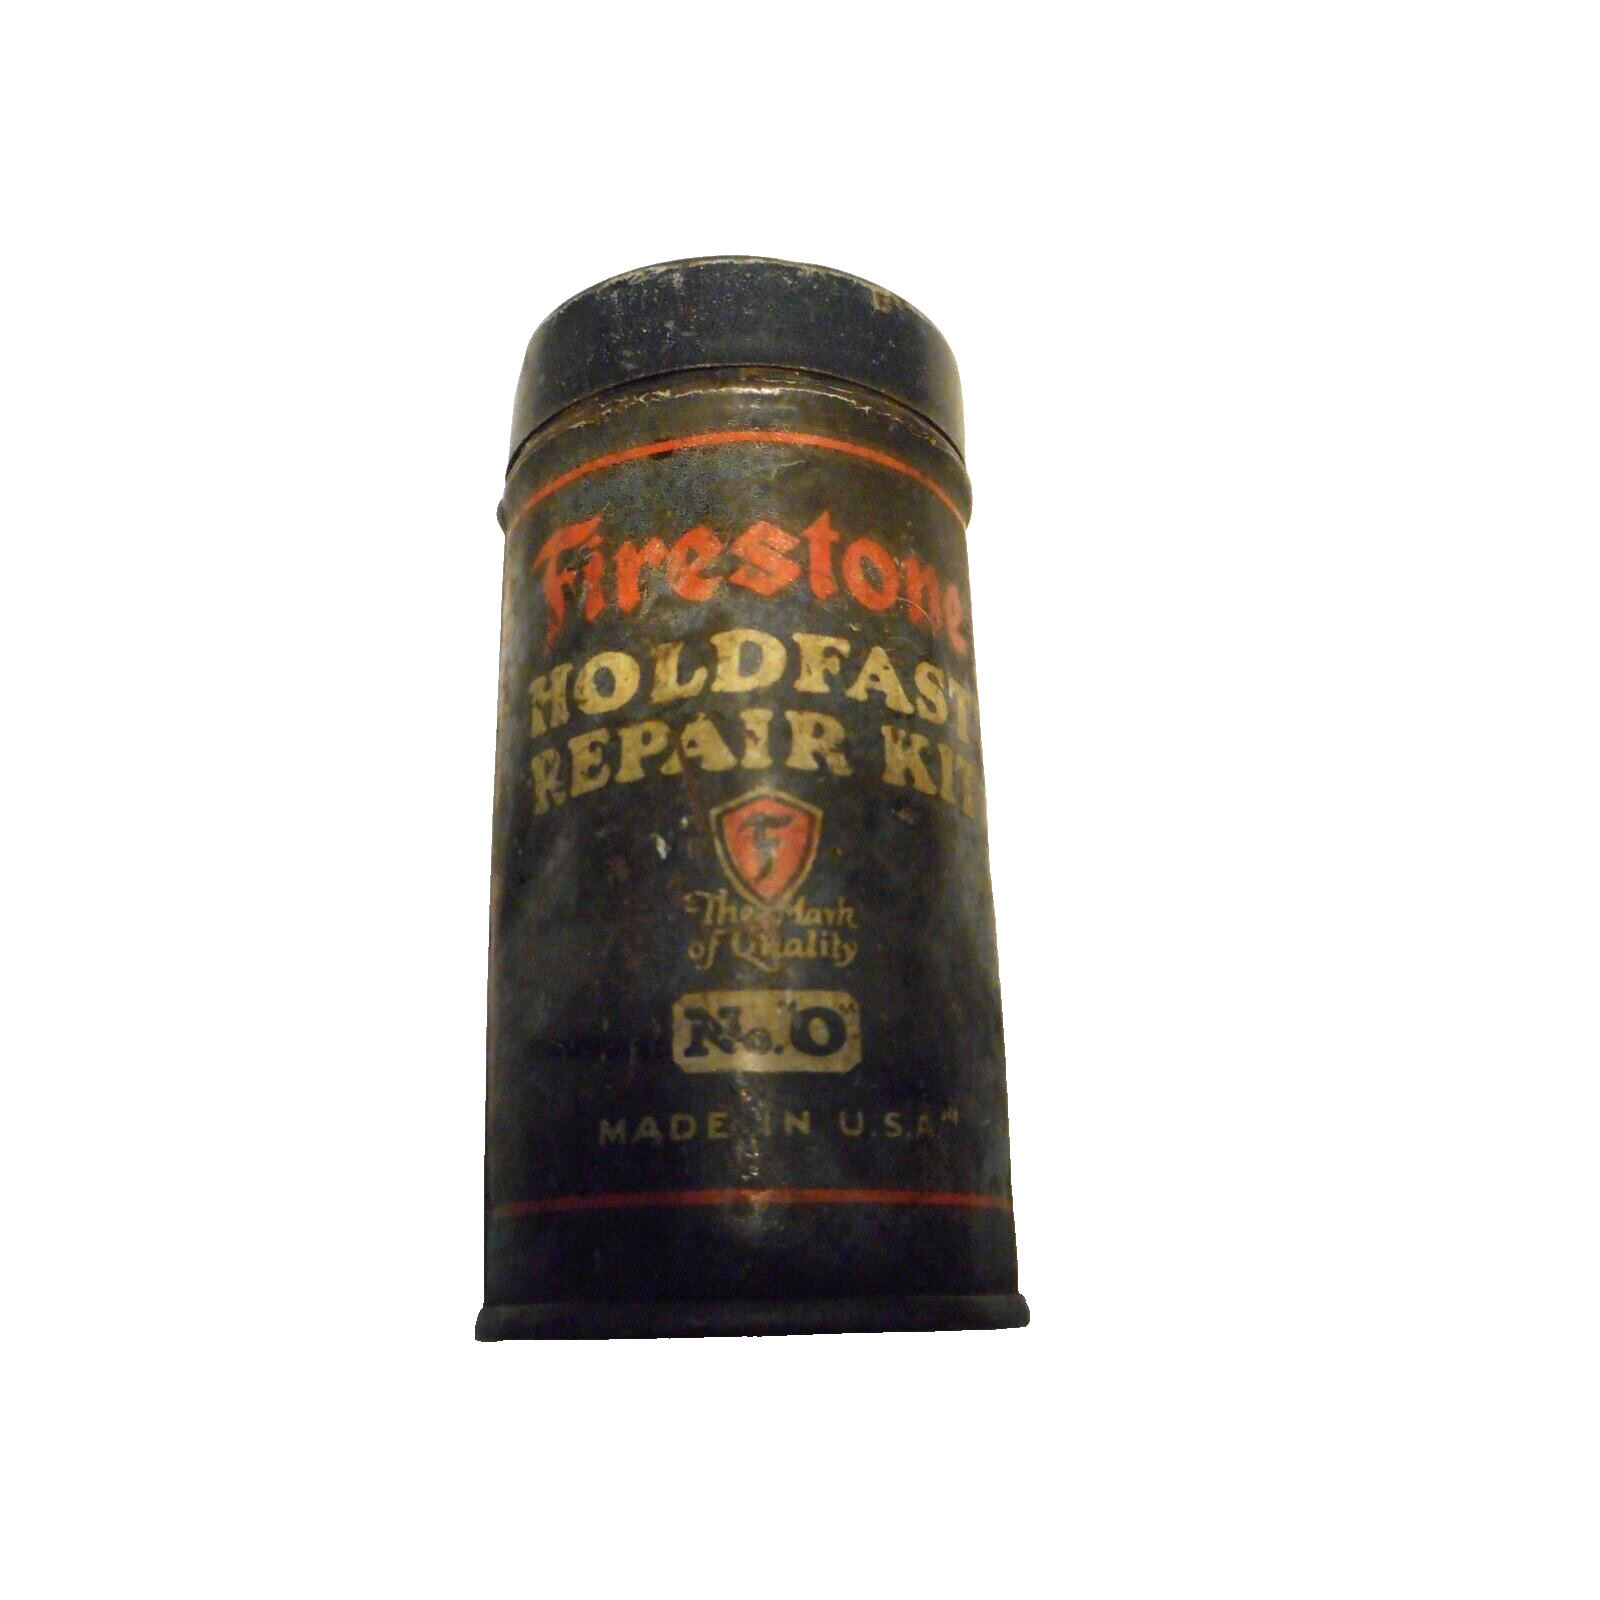 Vintage Firestone Holdfast Tire Repair Kit Antique Can